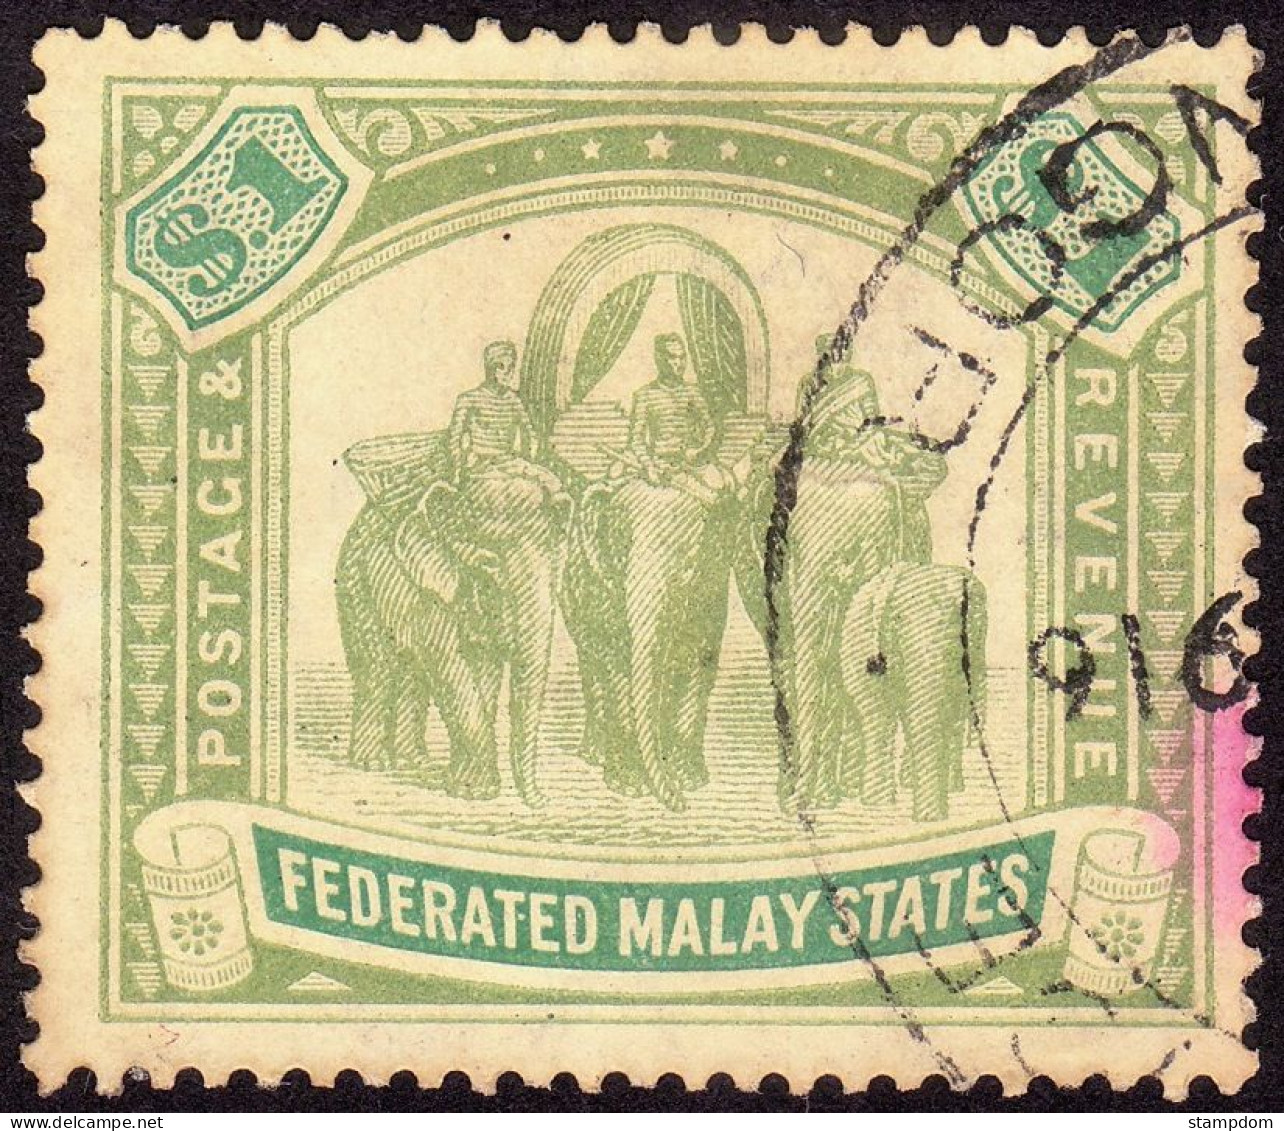 FEDERATED MALAY STATES FMS 1907 $1 Wmk.MCA Sc#34 -USED Fiscal Cancel @TE28 - Federated Malay States